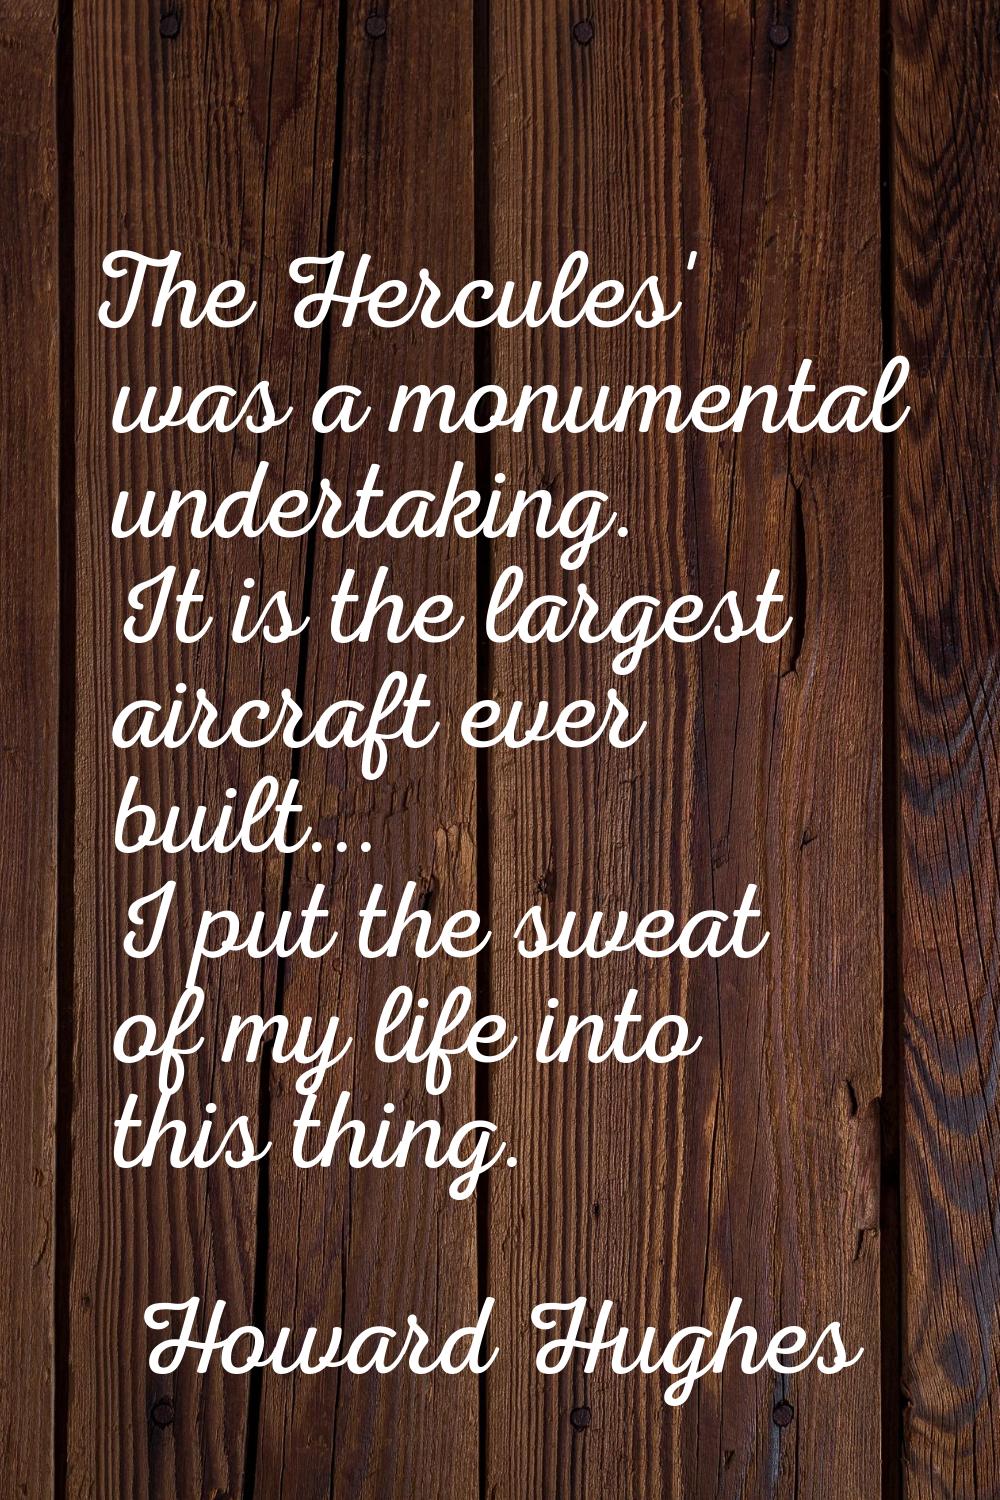 The Hercules' was a monumental undertaking. It is the largest aircraft ever built... I put the swea